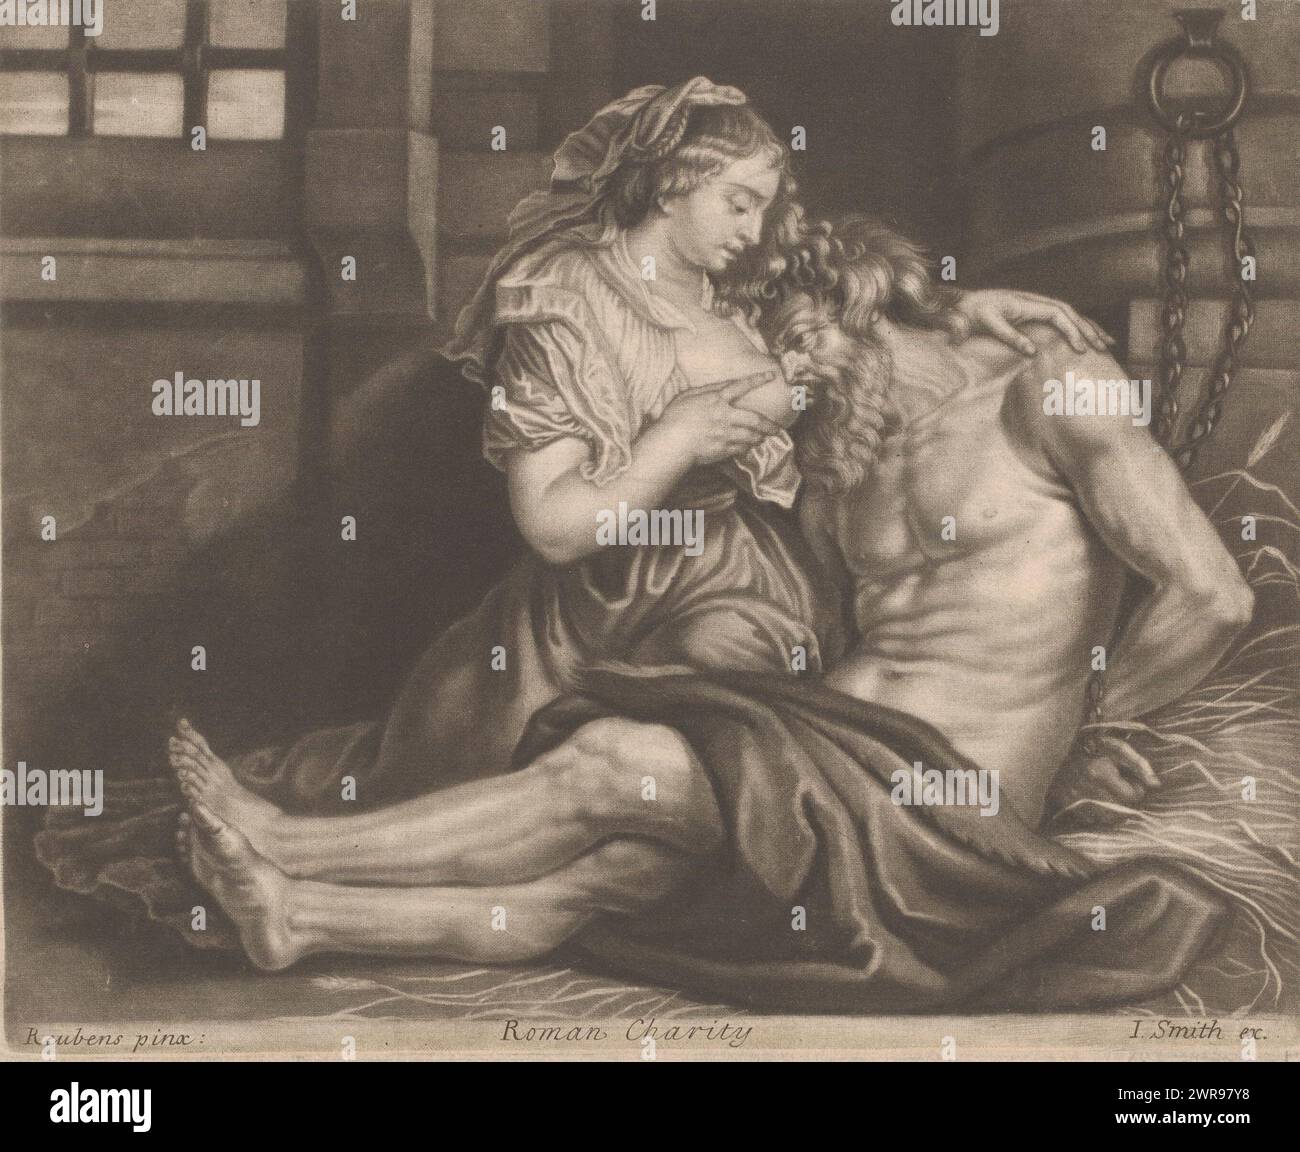 Cimon and Pero, Roman Charity (title on object), Caritas Romana, print maker: John Smith (prentmaker/ uitgever), (attributed to), after painting by: Peter Paul Rubens, 1662 - 1742, paper, height 180 mm × width 222 mm, print Stock Photo